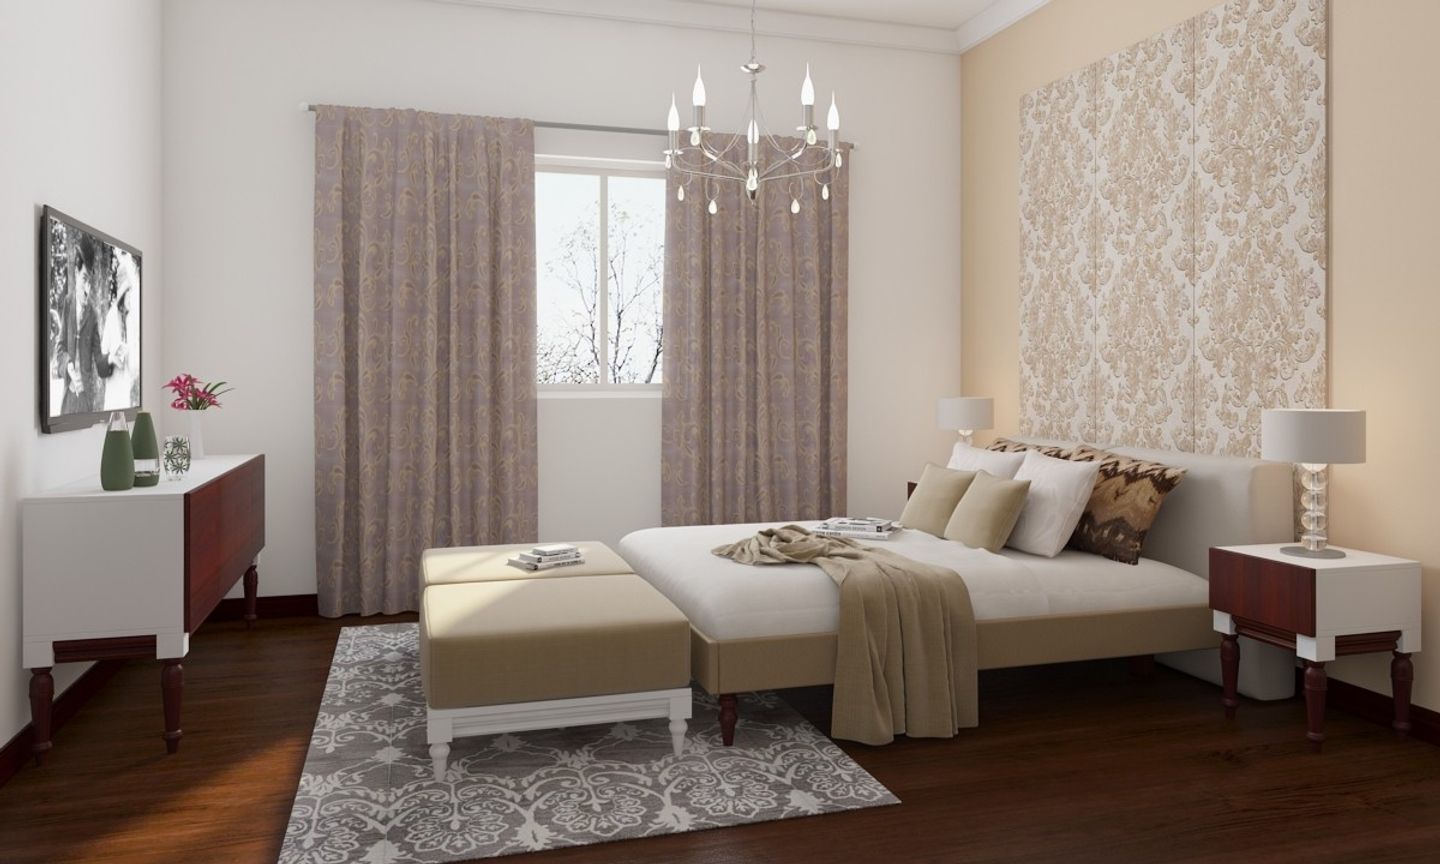 Classic and Spacious Master Bedroom Design